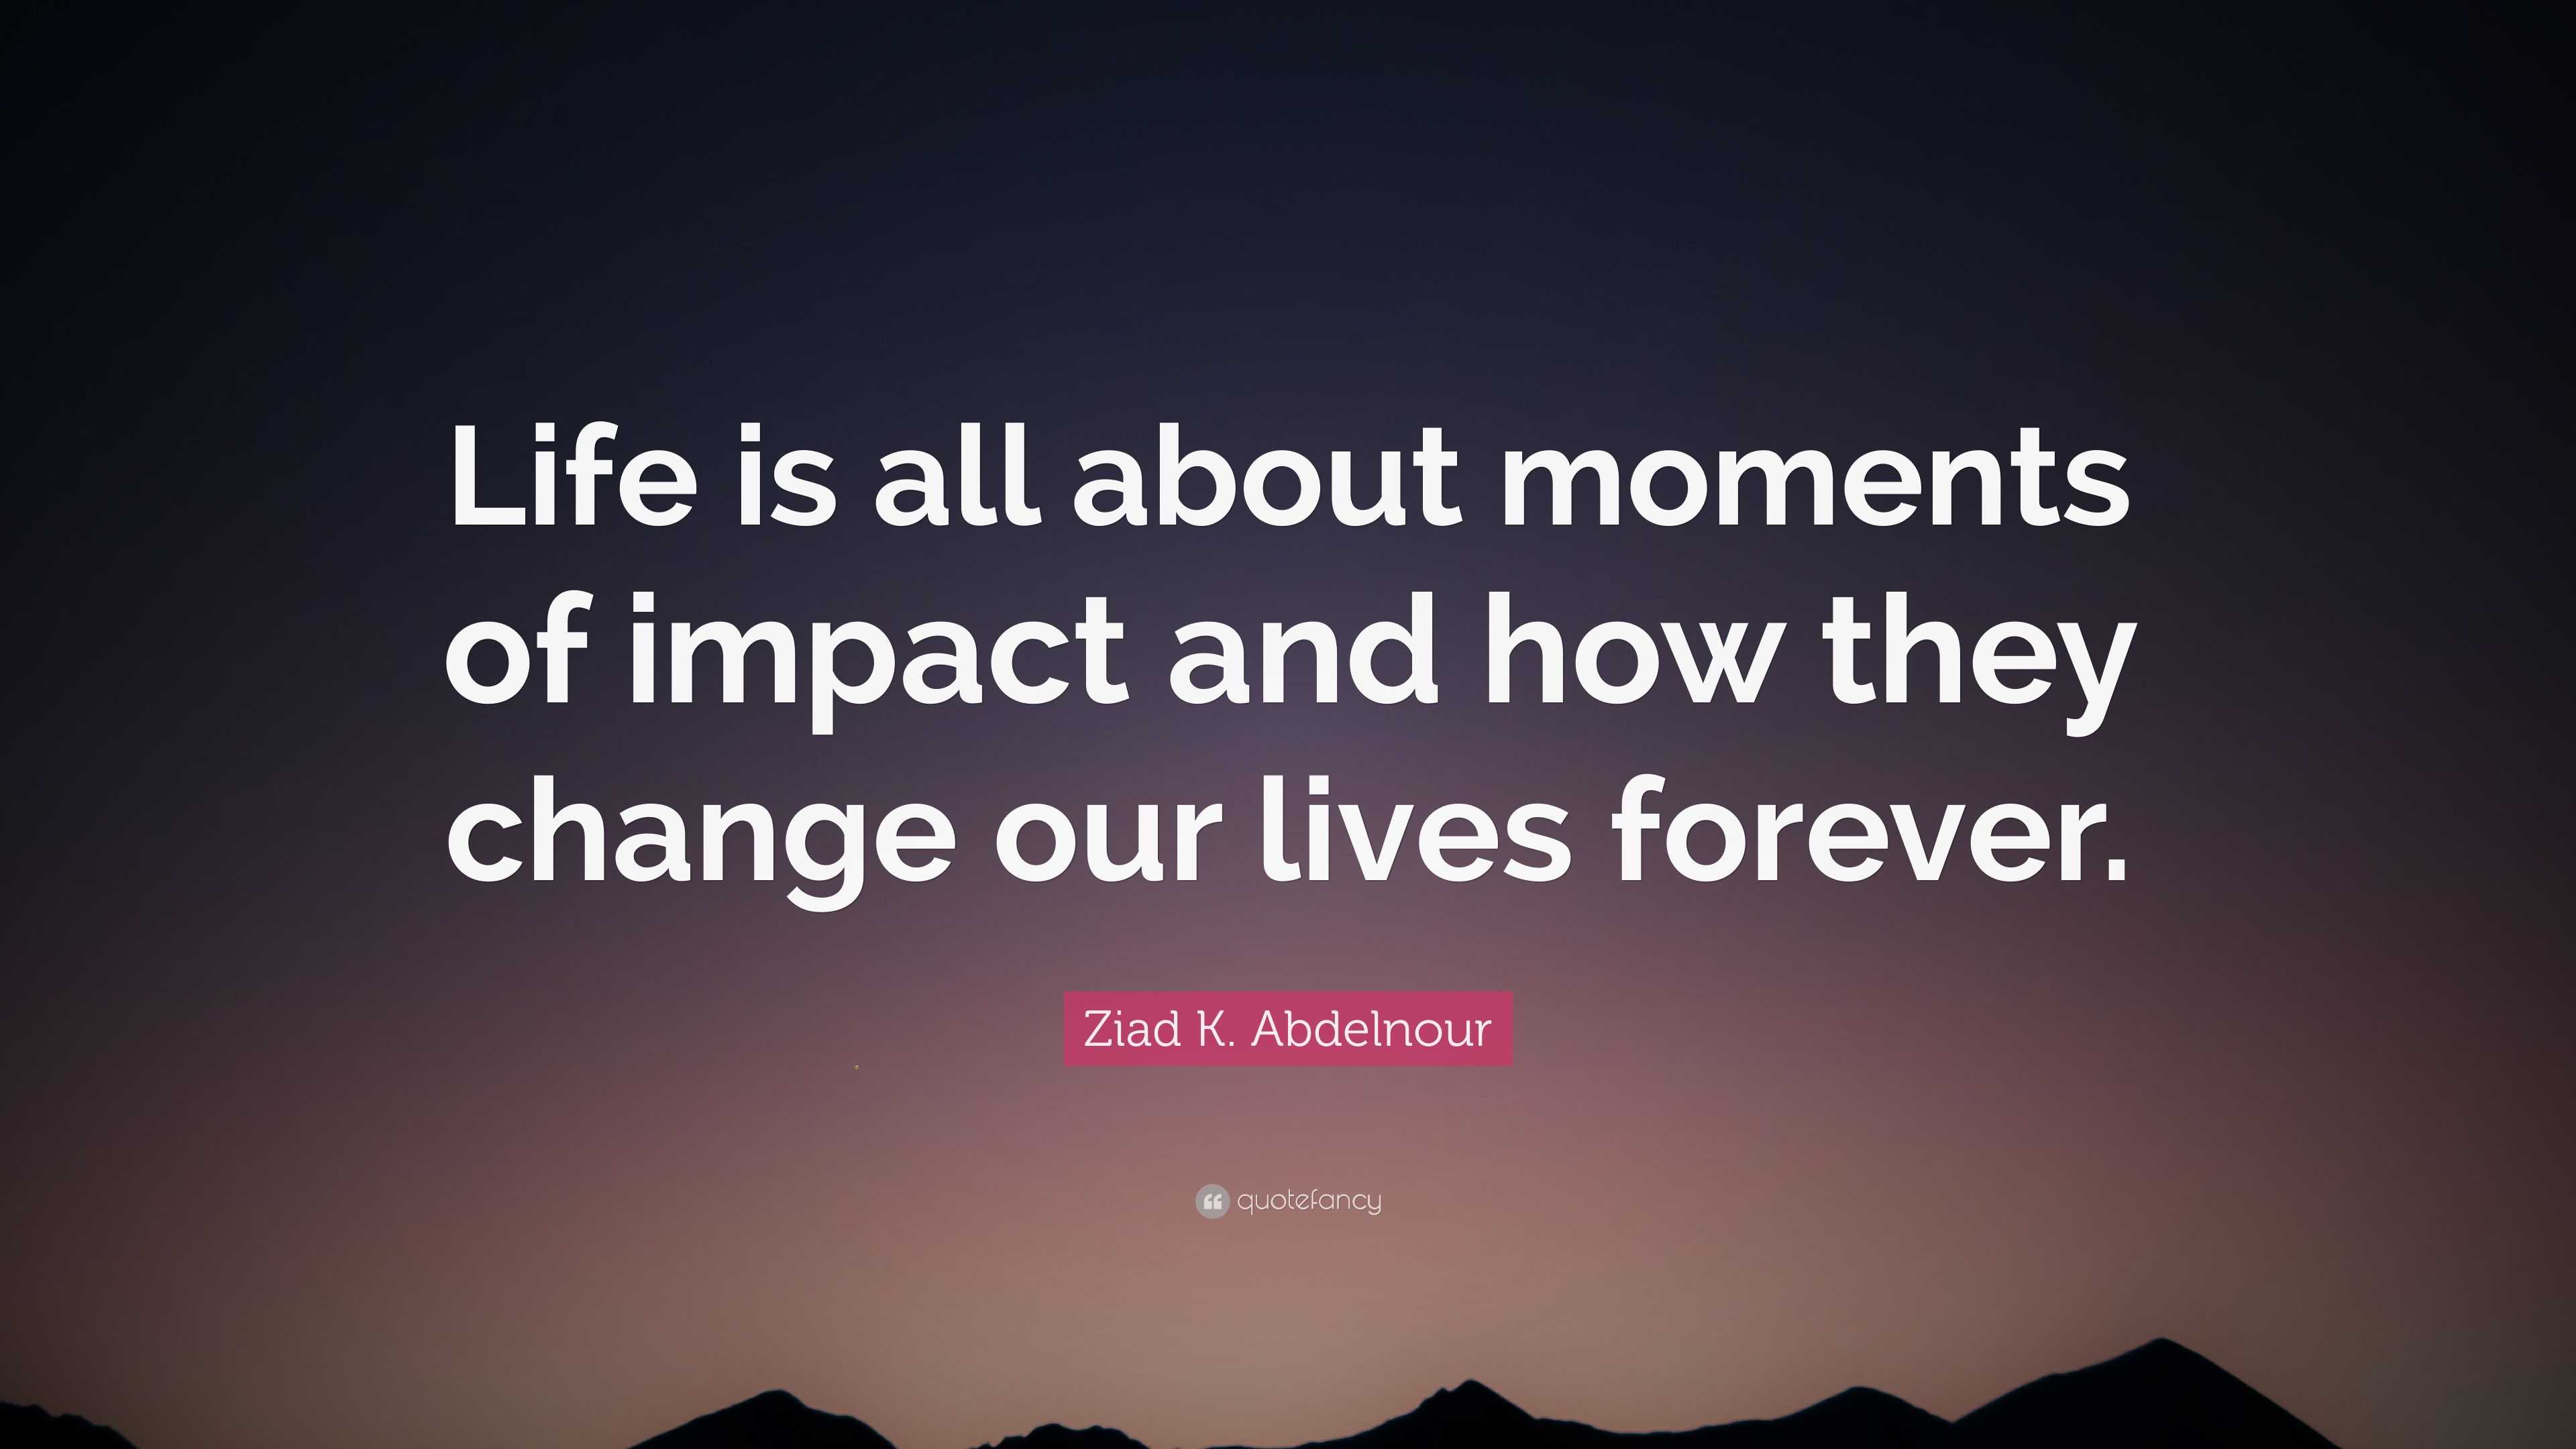 Ziad K Abdelnour Quote “Life is all about moments of impact and how